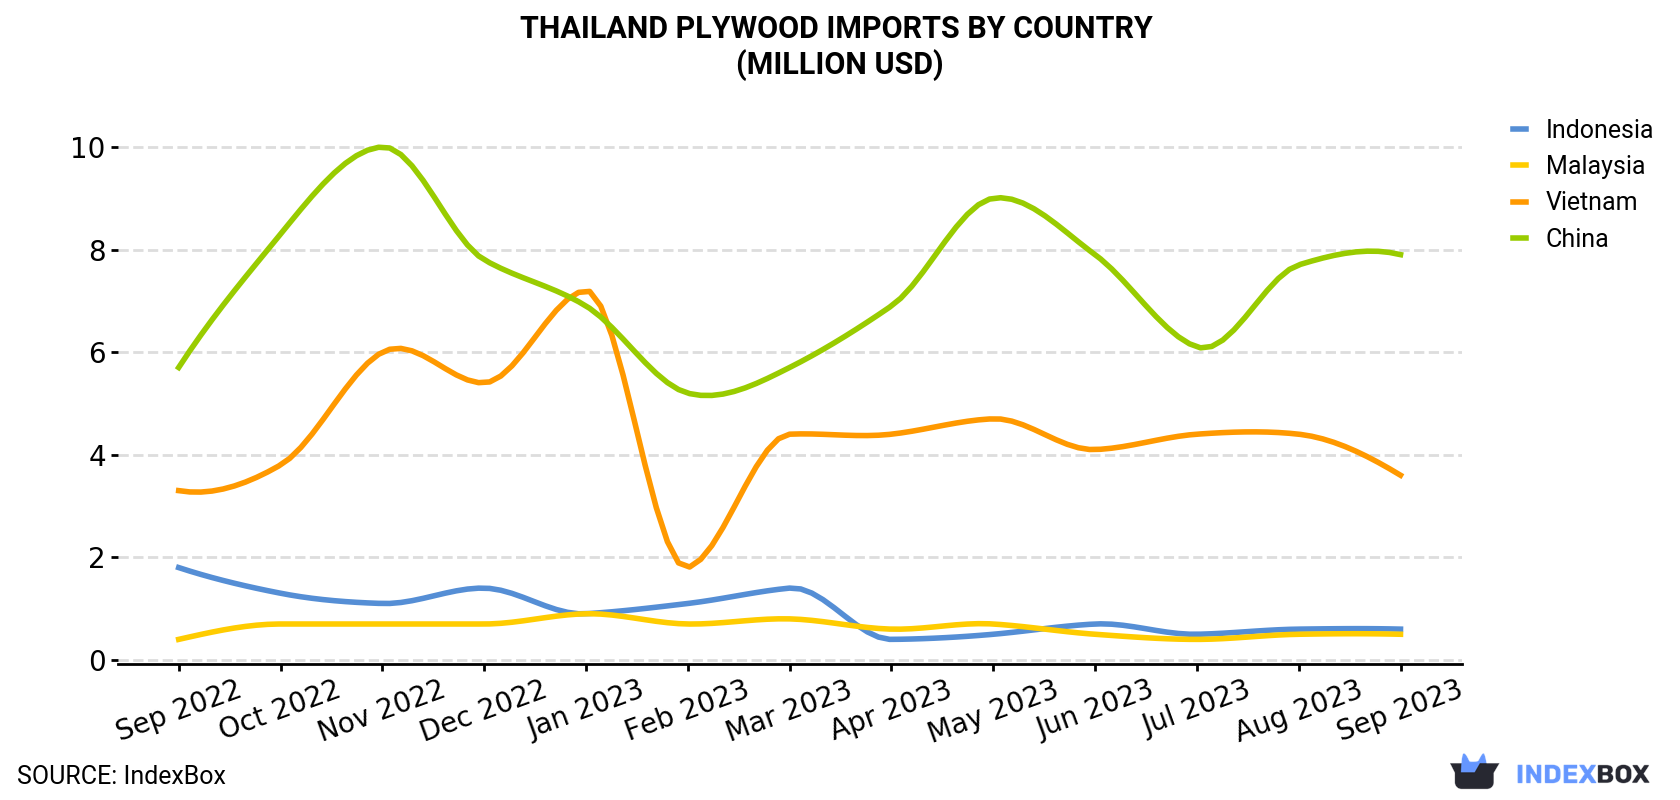 Thailand Plywood Imports By Country (Million USD)